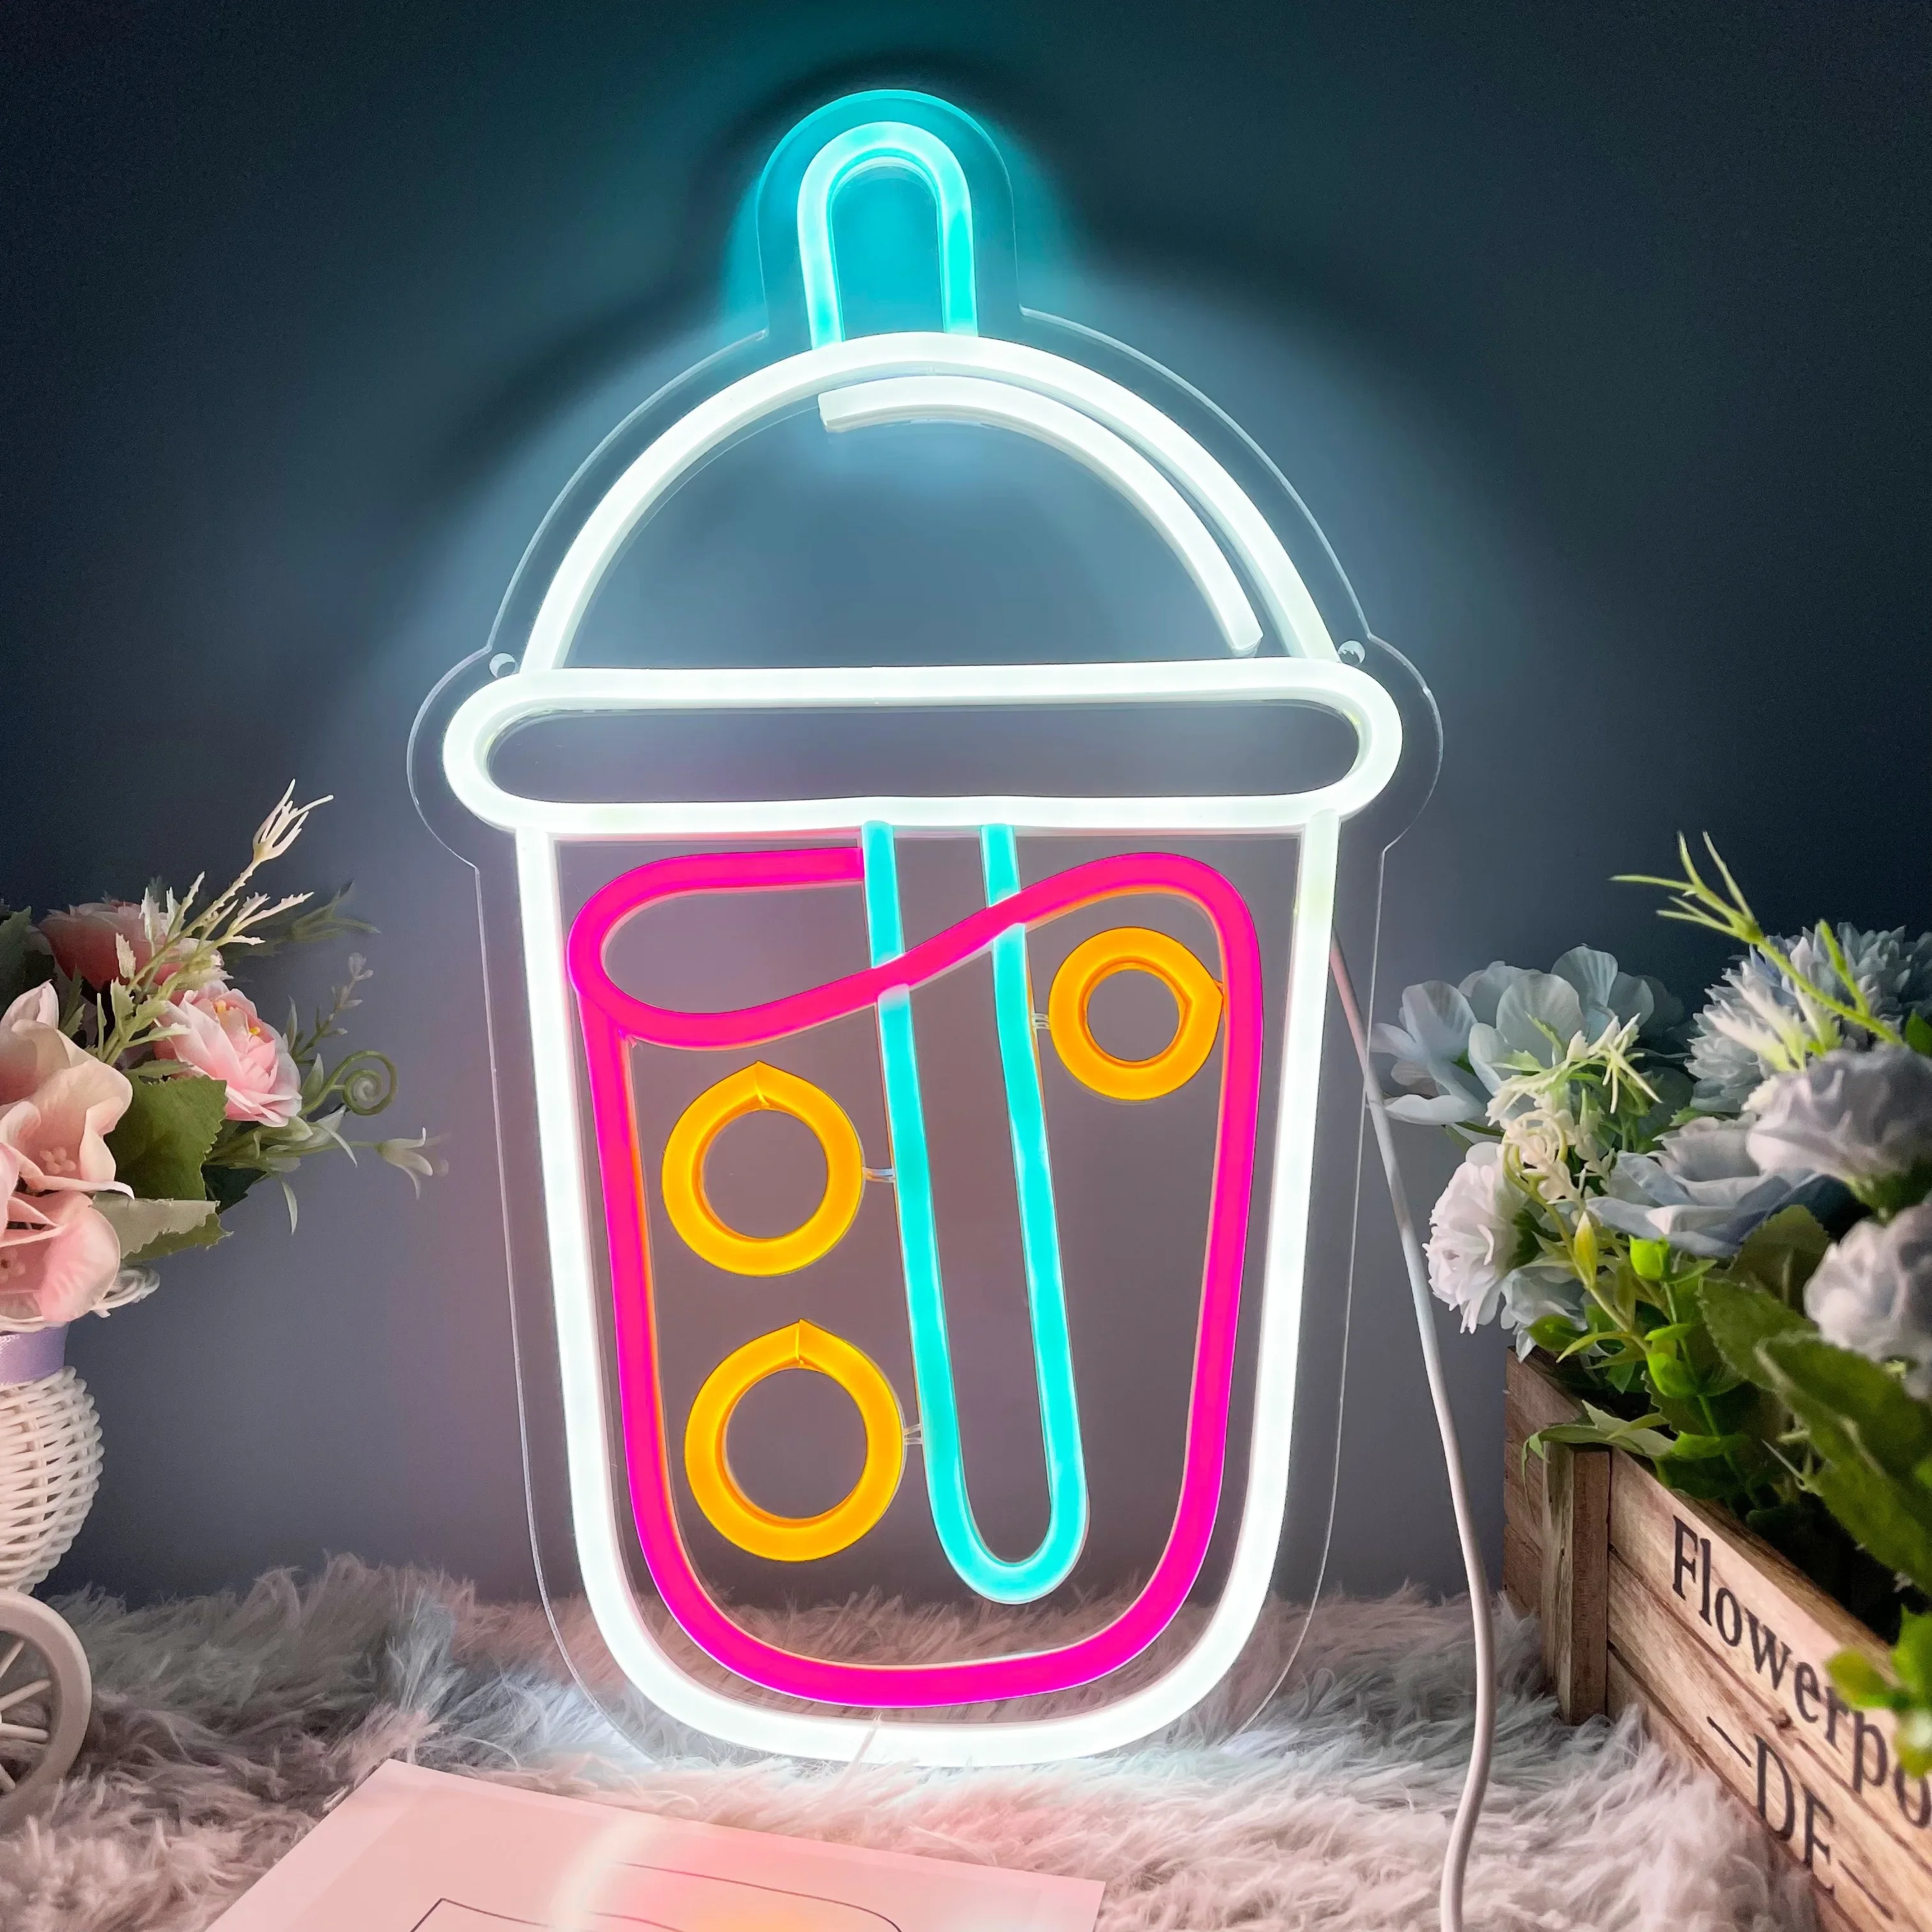 Boba Tea Neon Sign, Milk Tea LED Lights, Fast Food Drink Coffee Shop Wall Decor Light, Personalized Gift Restaurant Welcome Sign